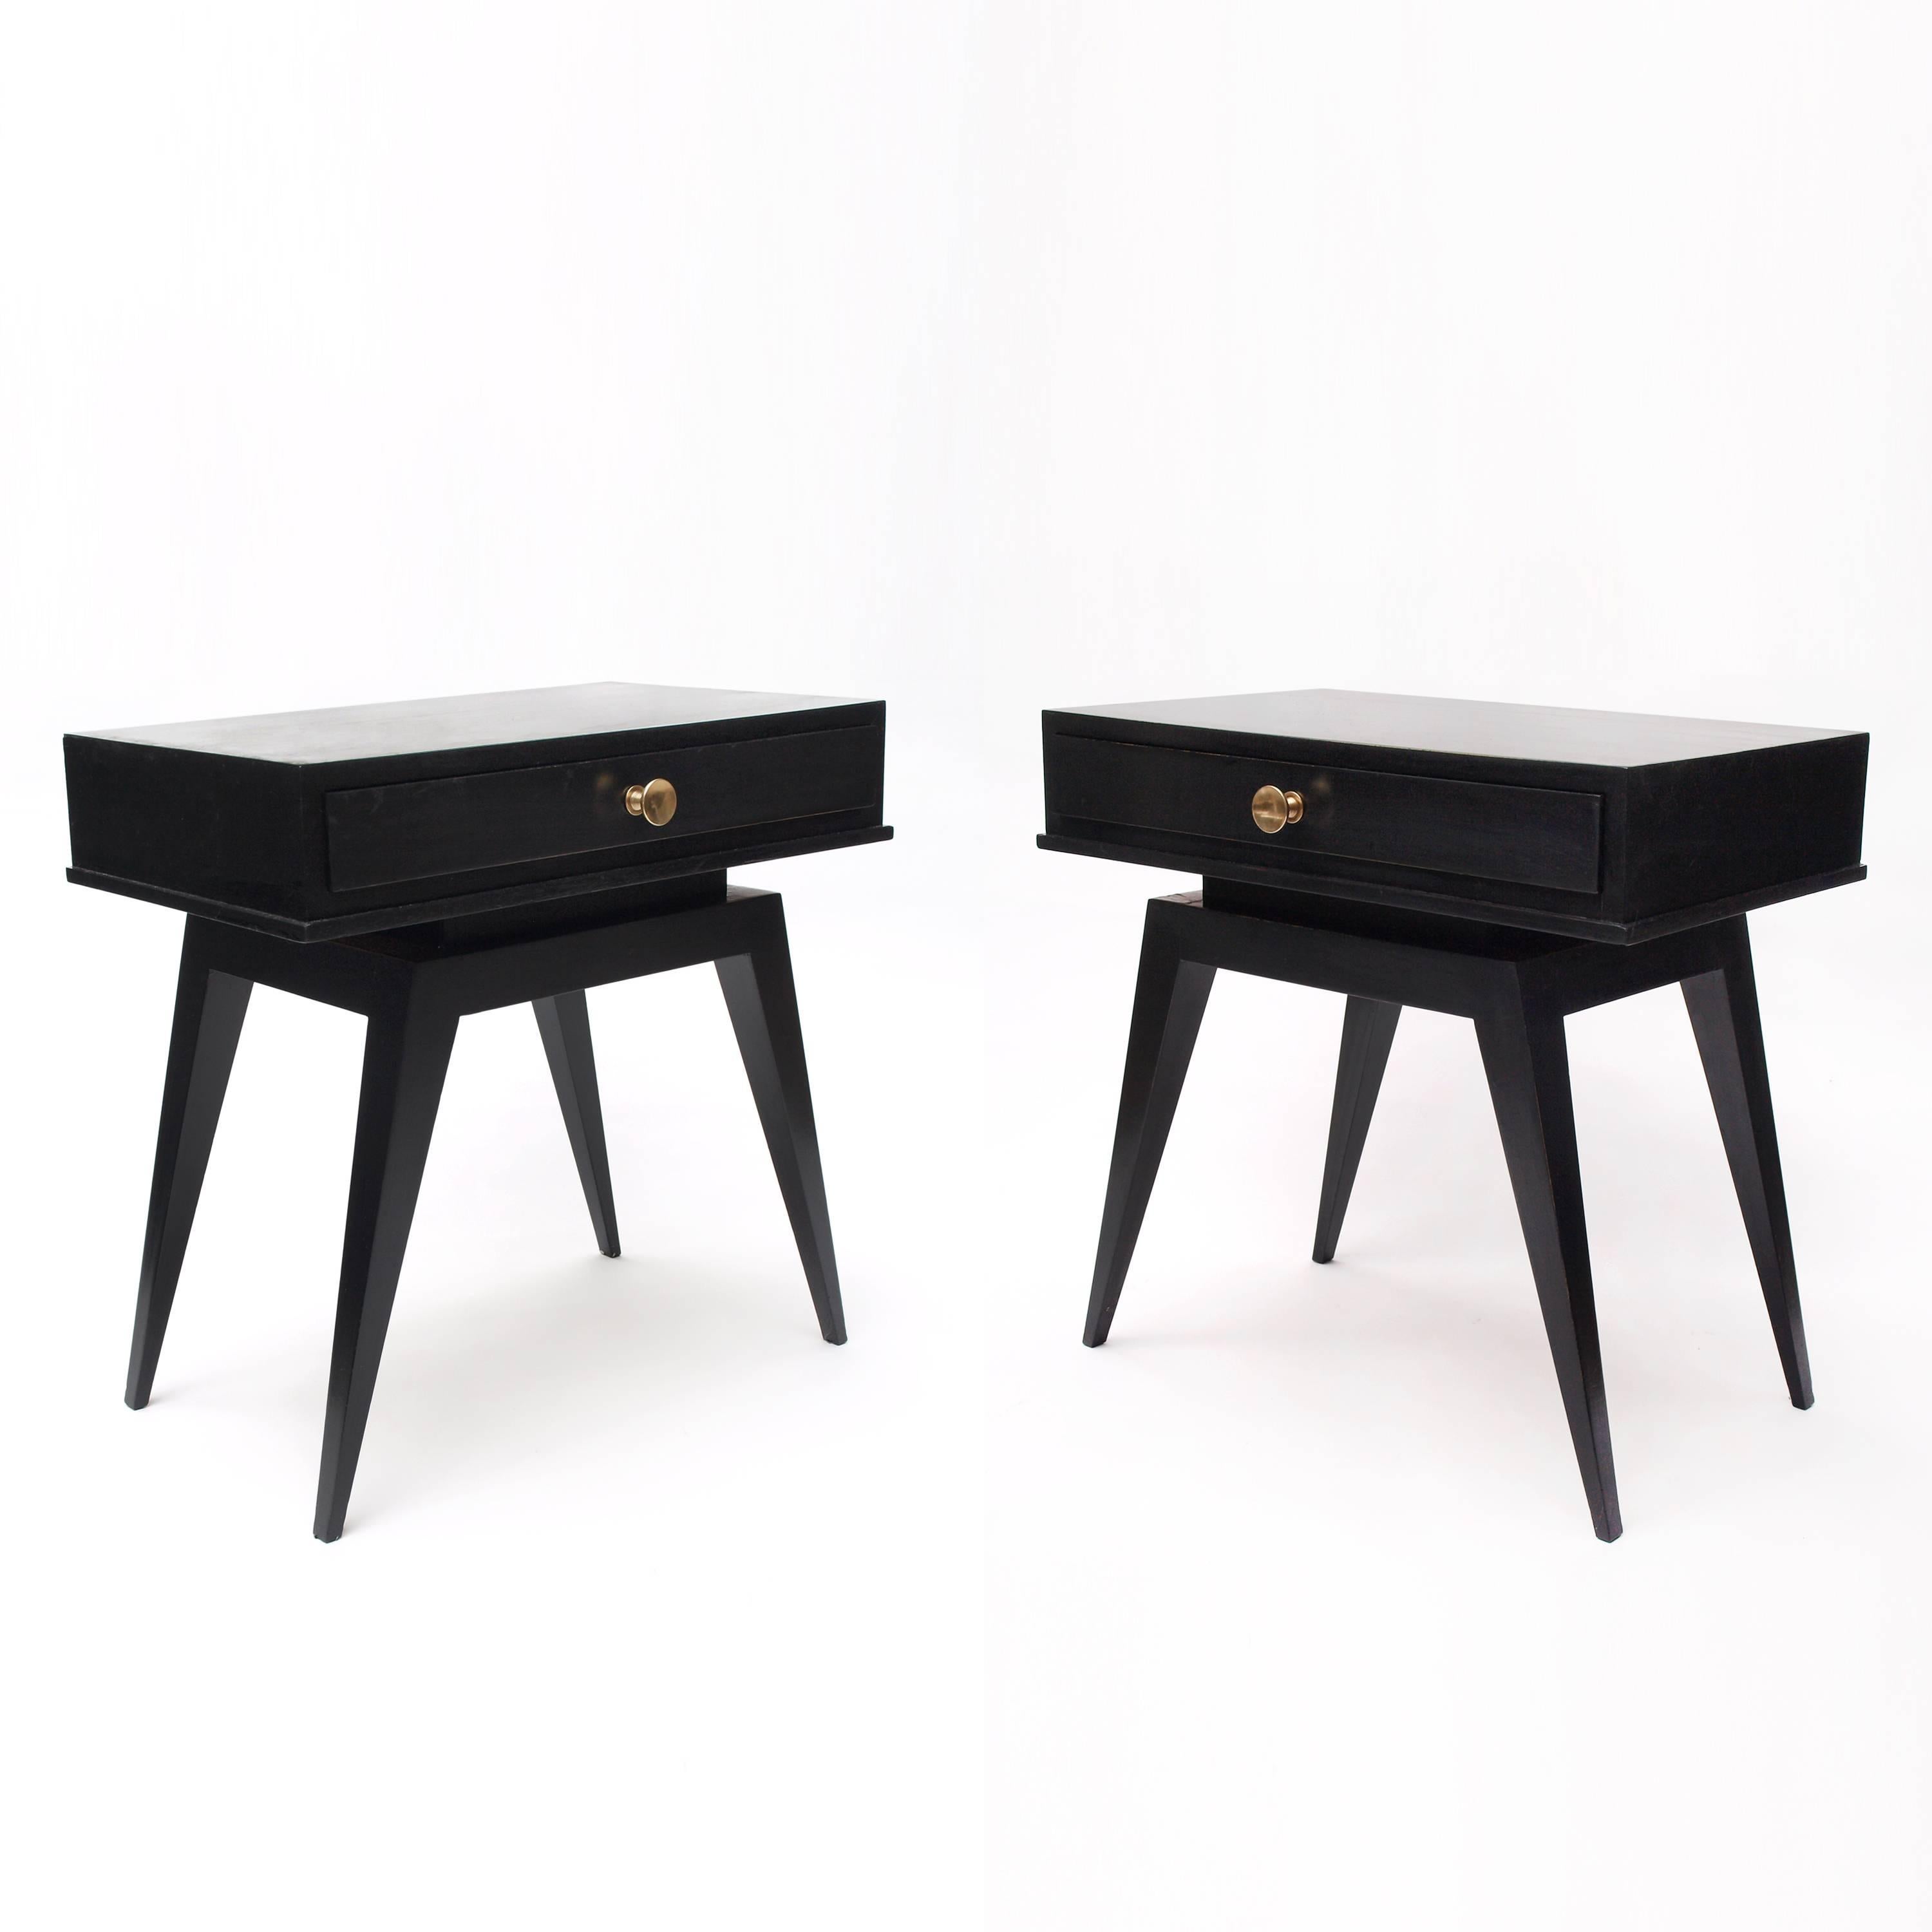 A pair of black 1940s French nightstands. Each stand has a single shallow drawer adorned with a brass handle featuring a subtle conical concentric motif. The drawer section is supported on a staggered plinth to appear floating above the